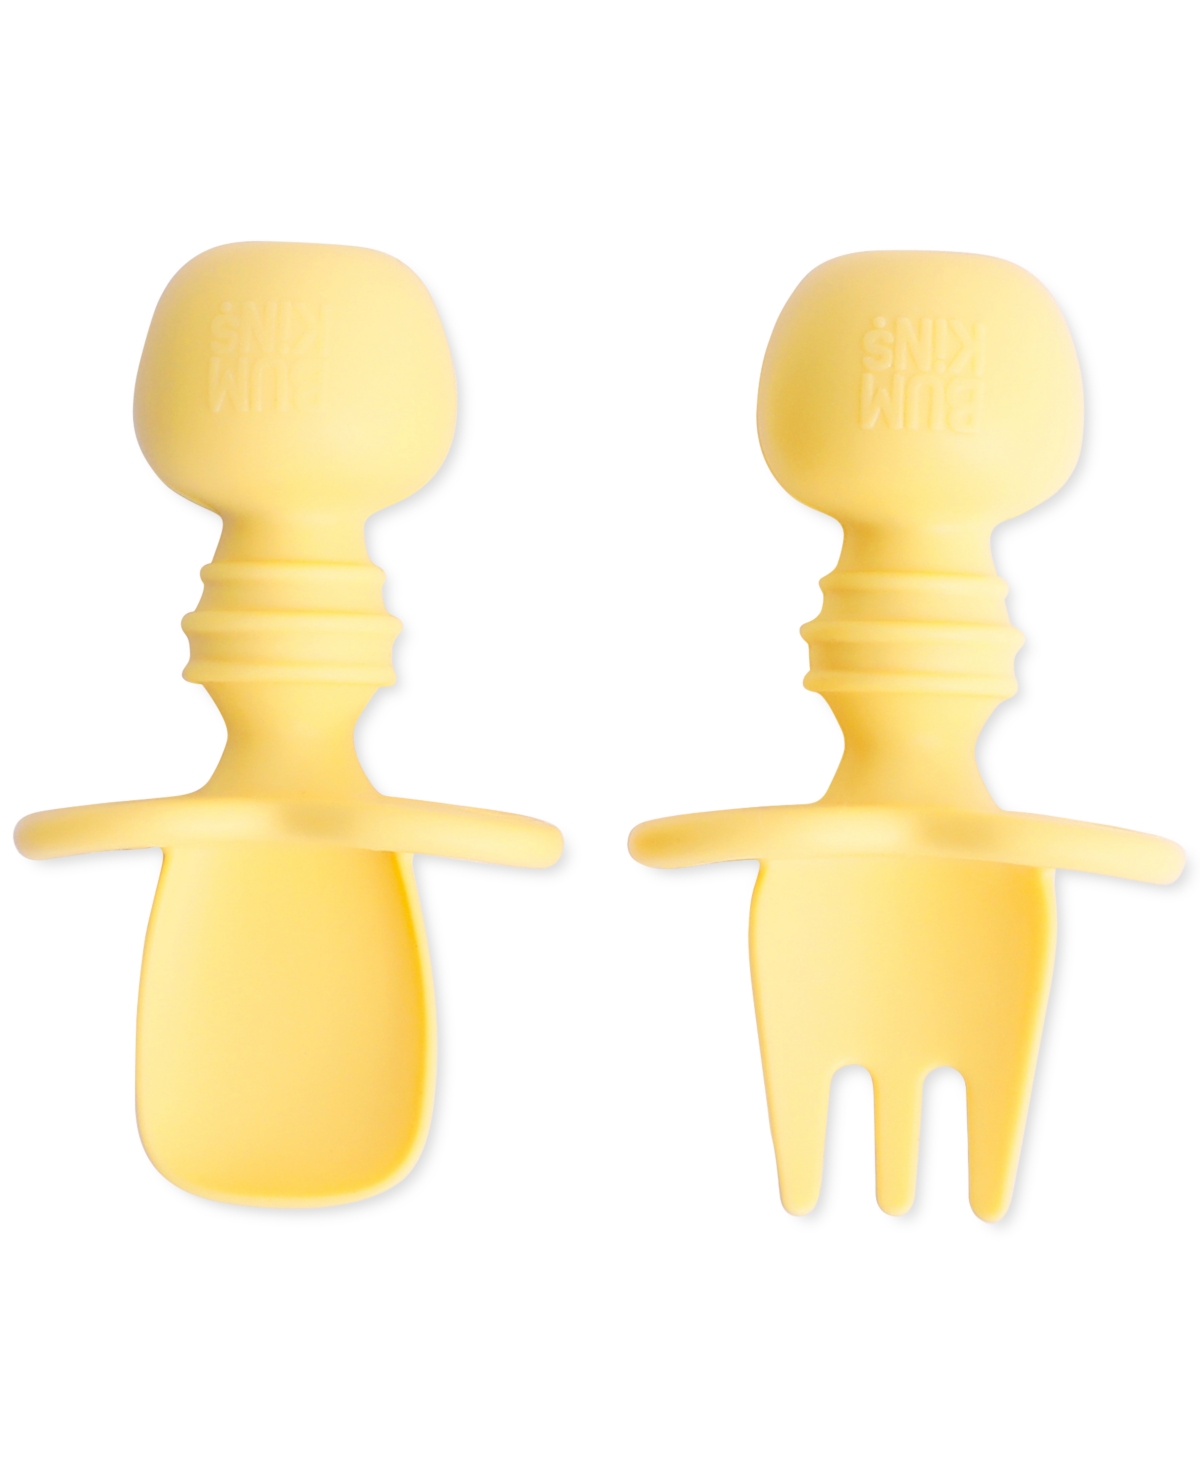 Bumkins Silicone Chewtensils In Yellow